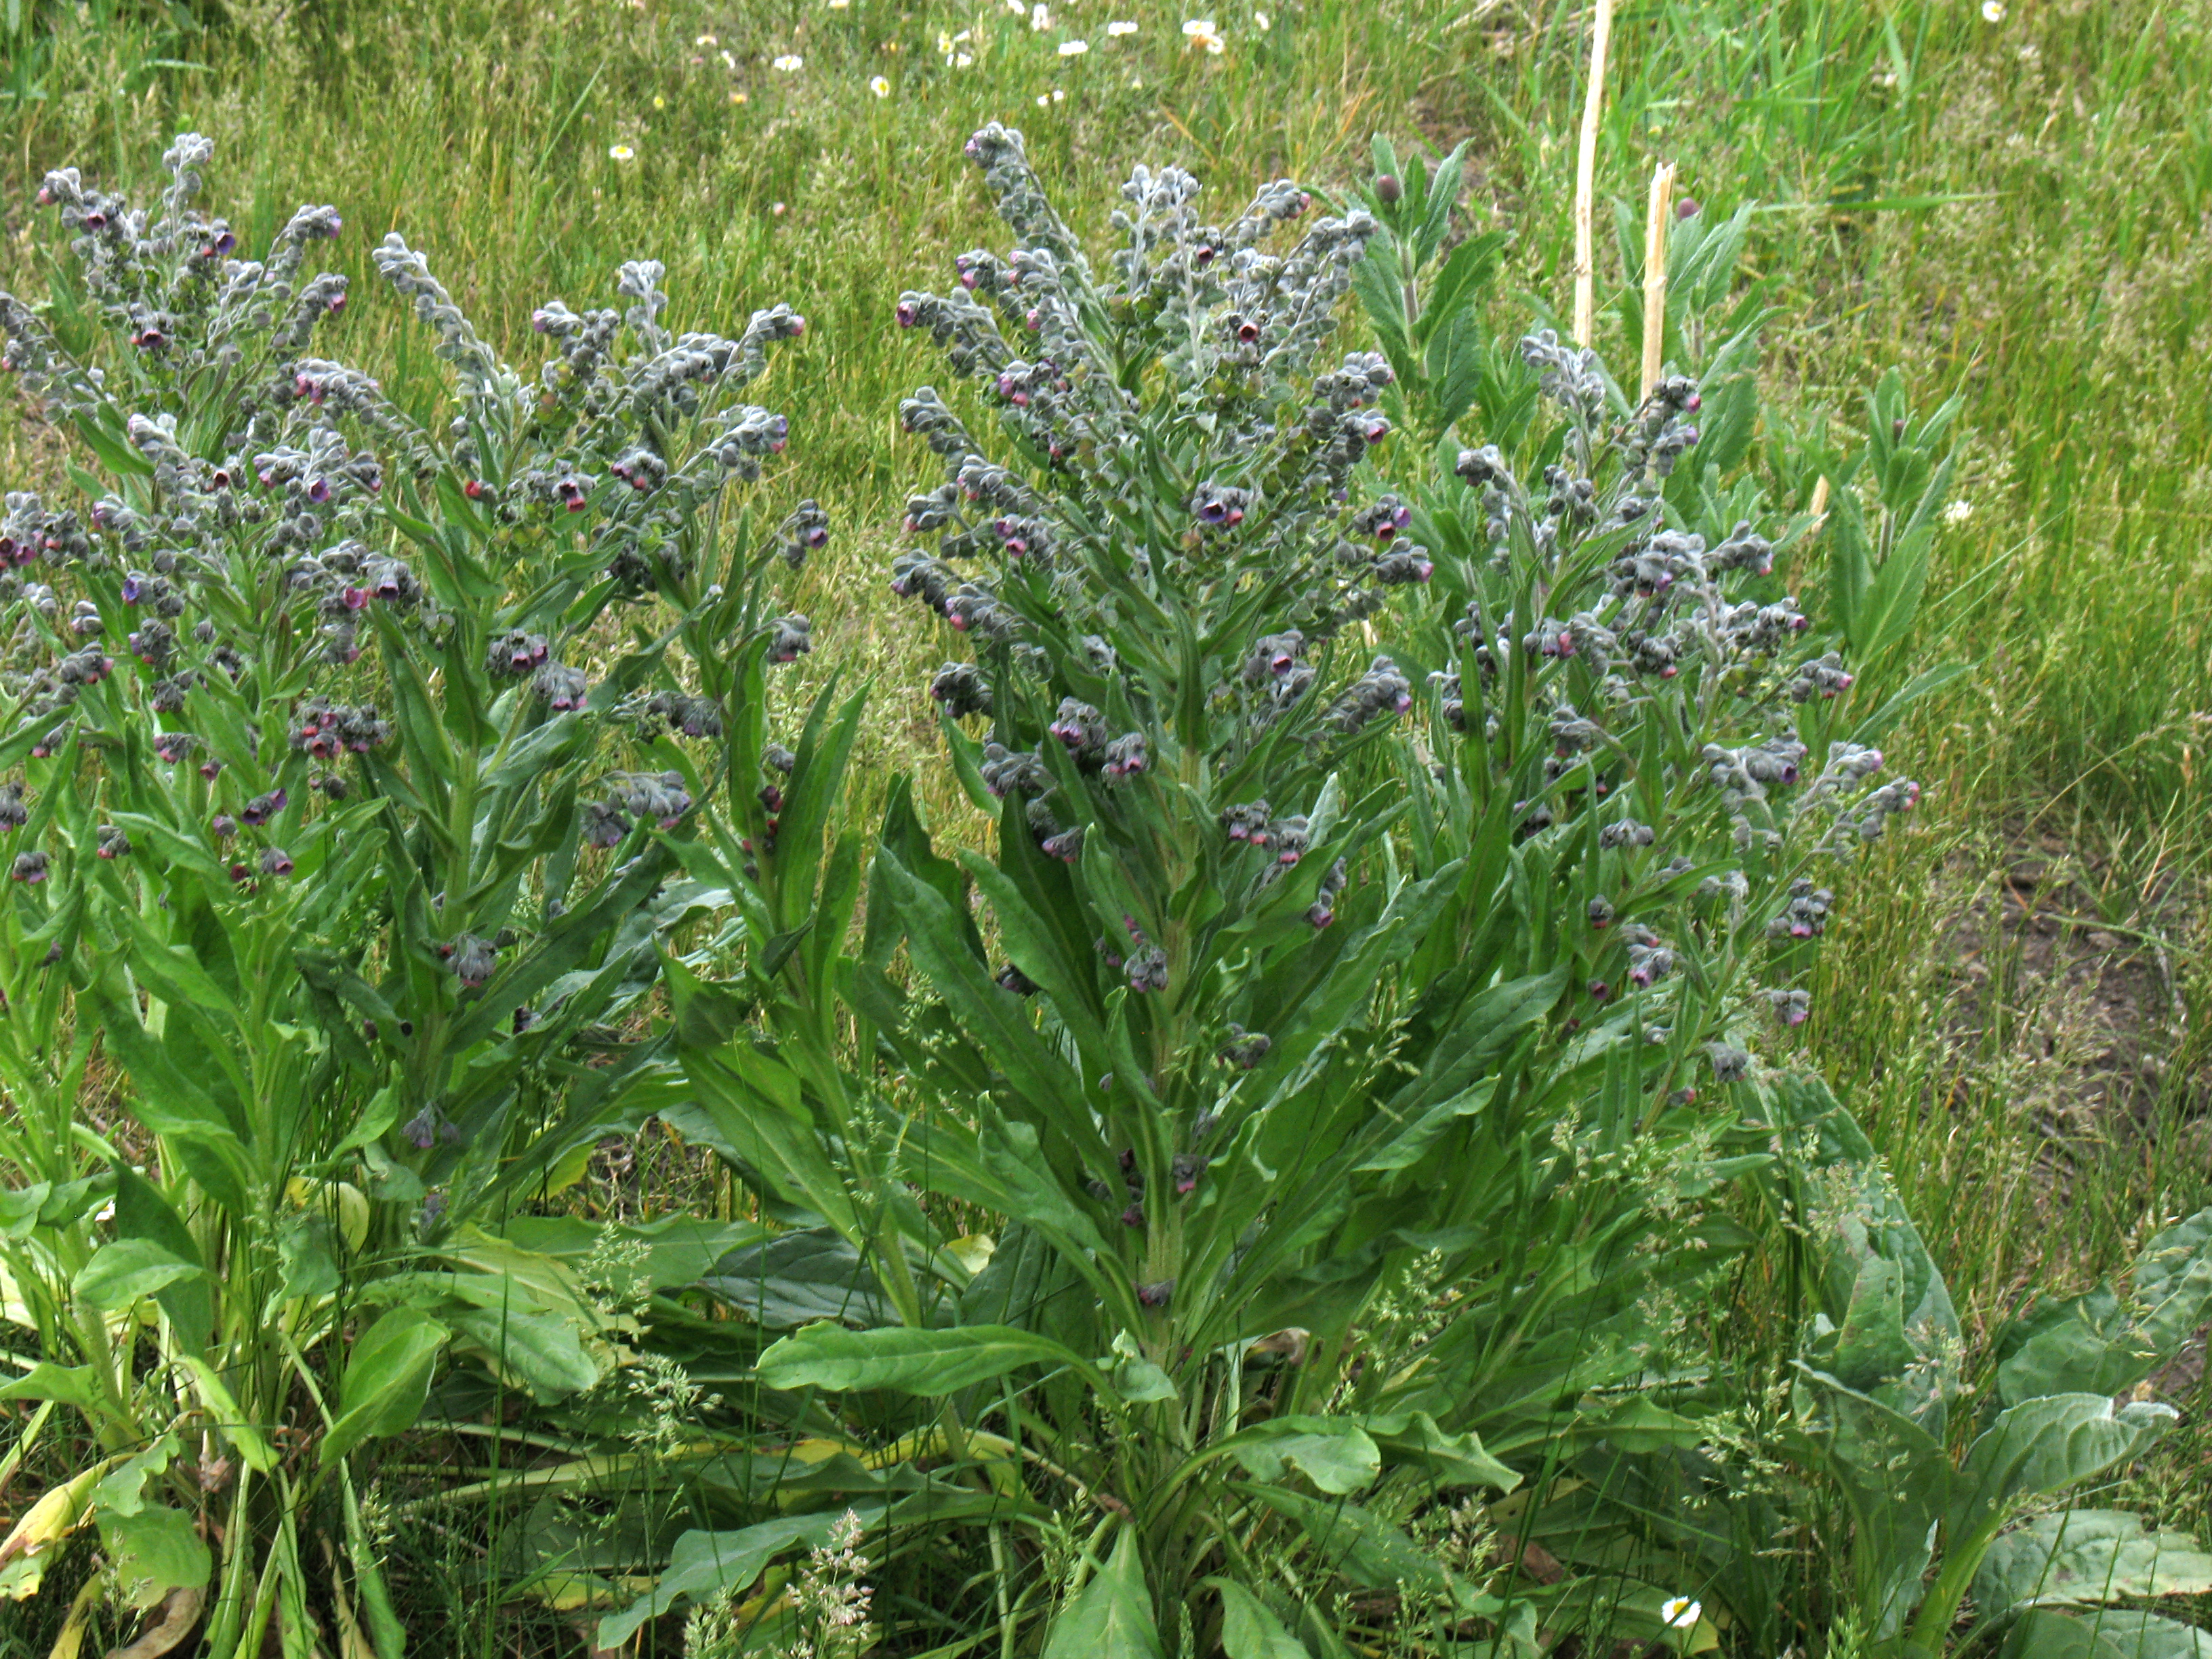 Hounds tongue (gypsyflower), Cynoglossum officinale
